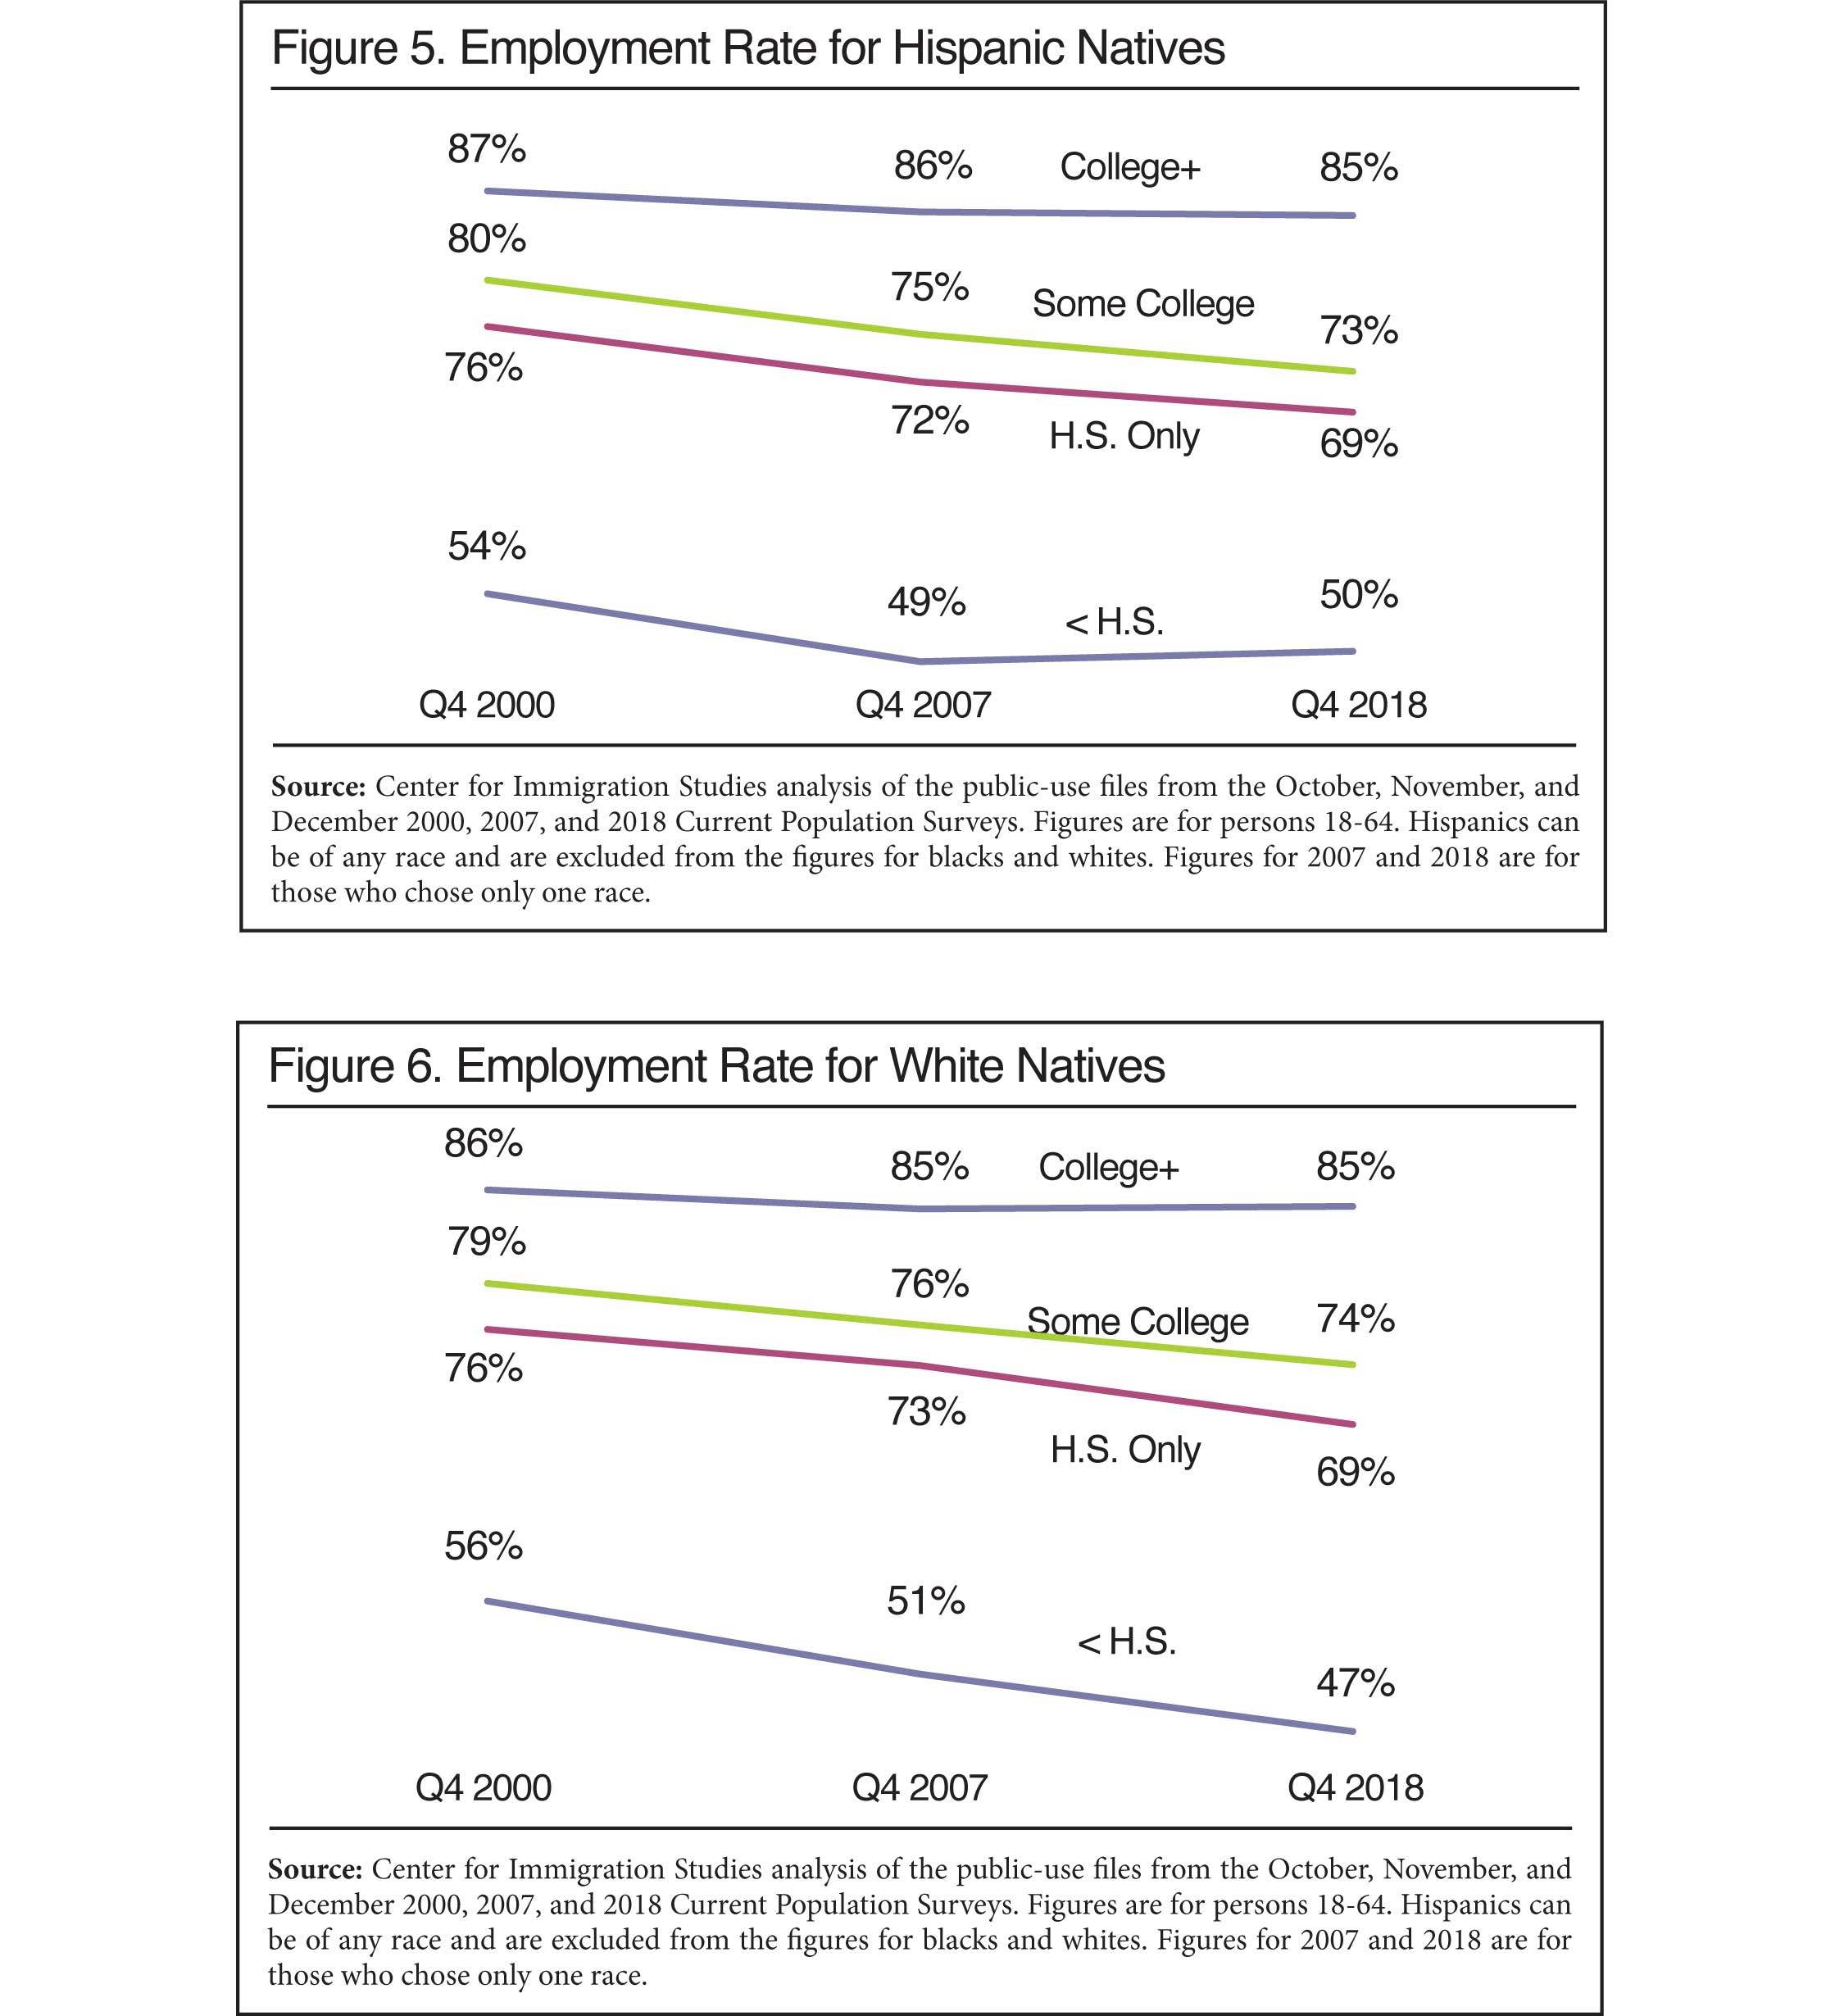 Graph: Employment Rate for White and Hispanic Natives, 2000, 2007, 2018